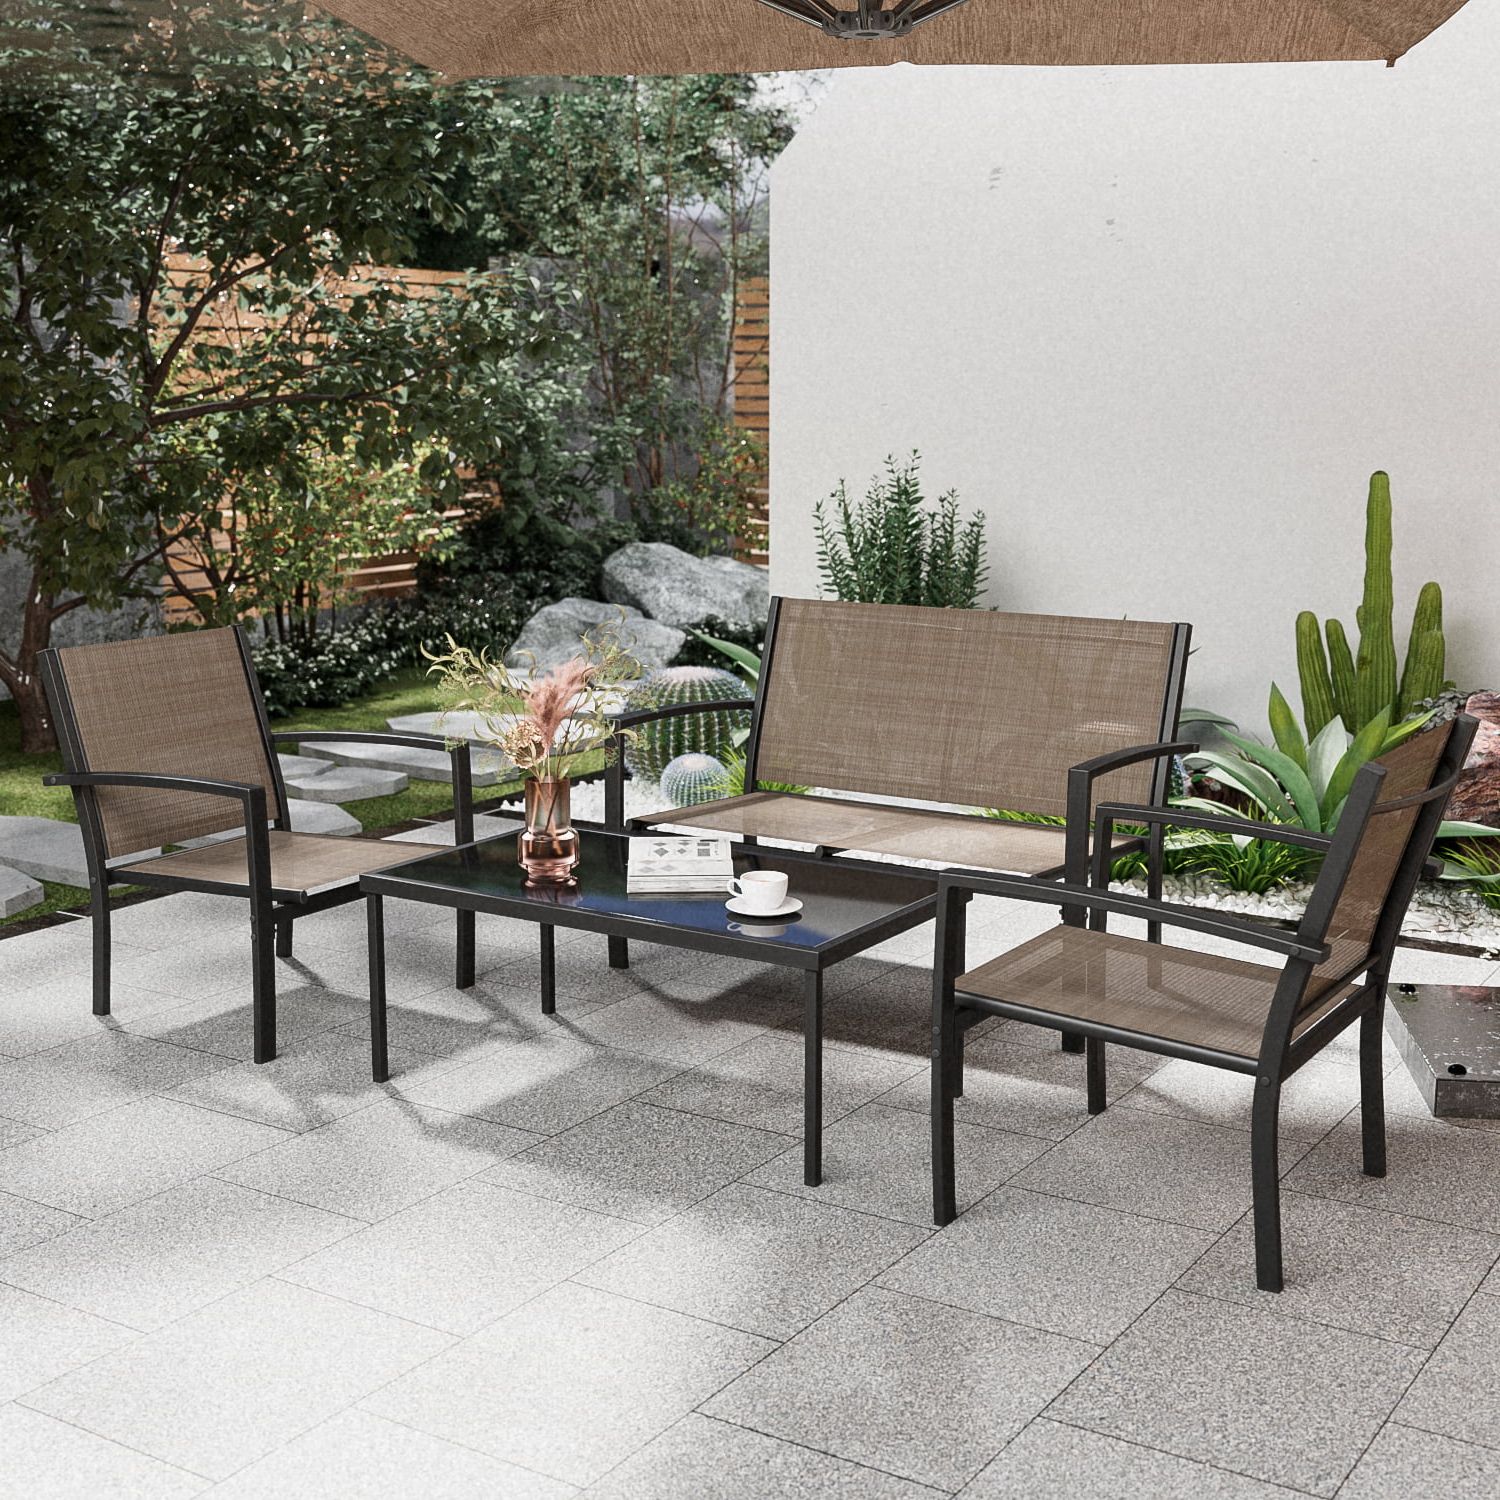 Current Loveseat Tea Table For Balcony Pertaining To Lacoo 4 Pieces Outdoor Furniture Set Patio Textilene Steel Conversation Set  With Loveseat Tea Table For Lawn And Balcony, Brown – Walmart (View 2 of 15)